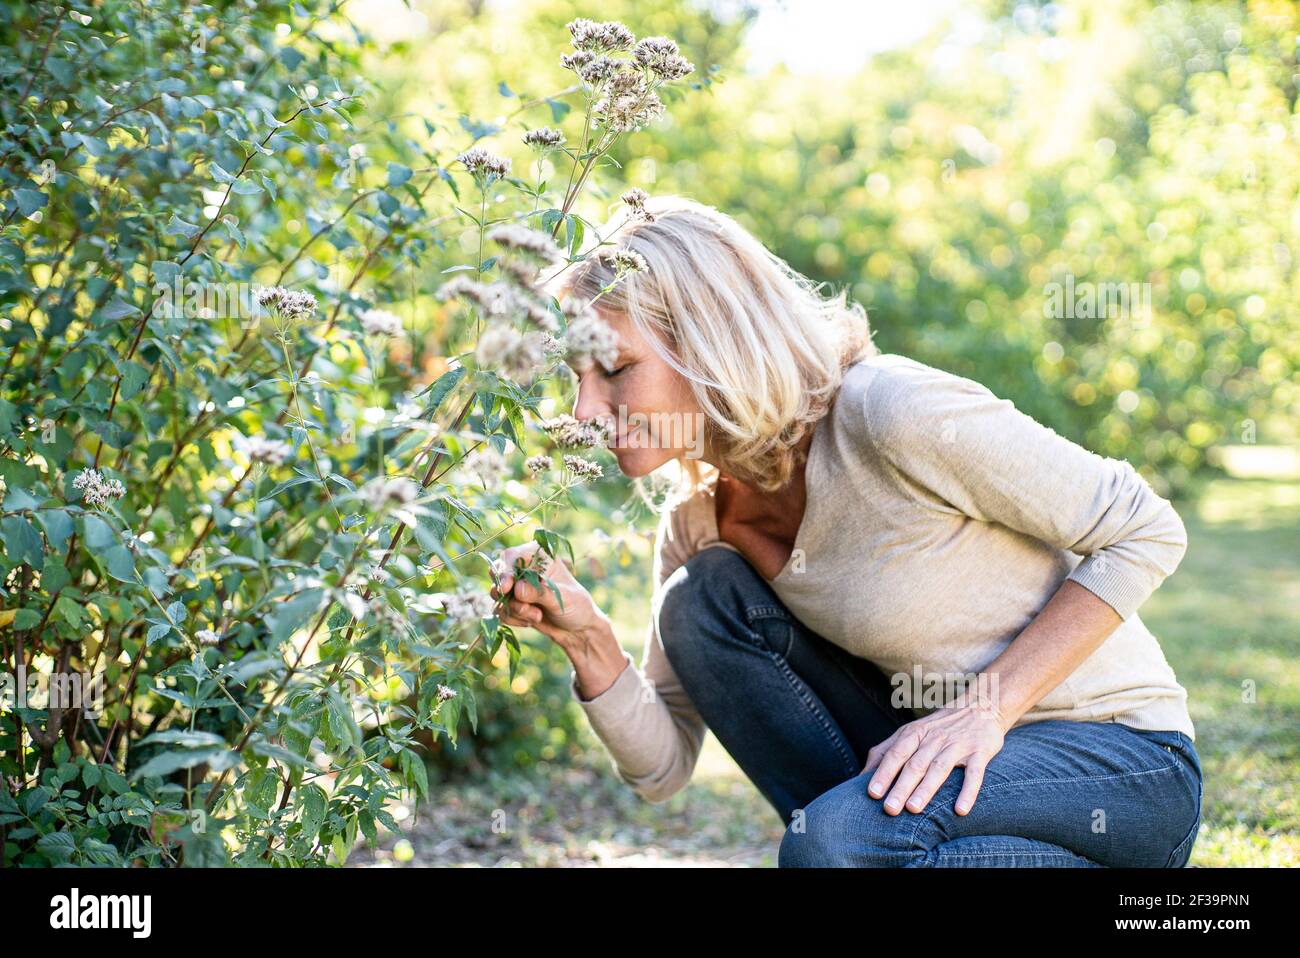 Smiling mature woman smelling flowers in backyard Stock Photo